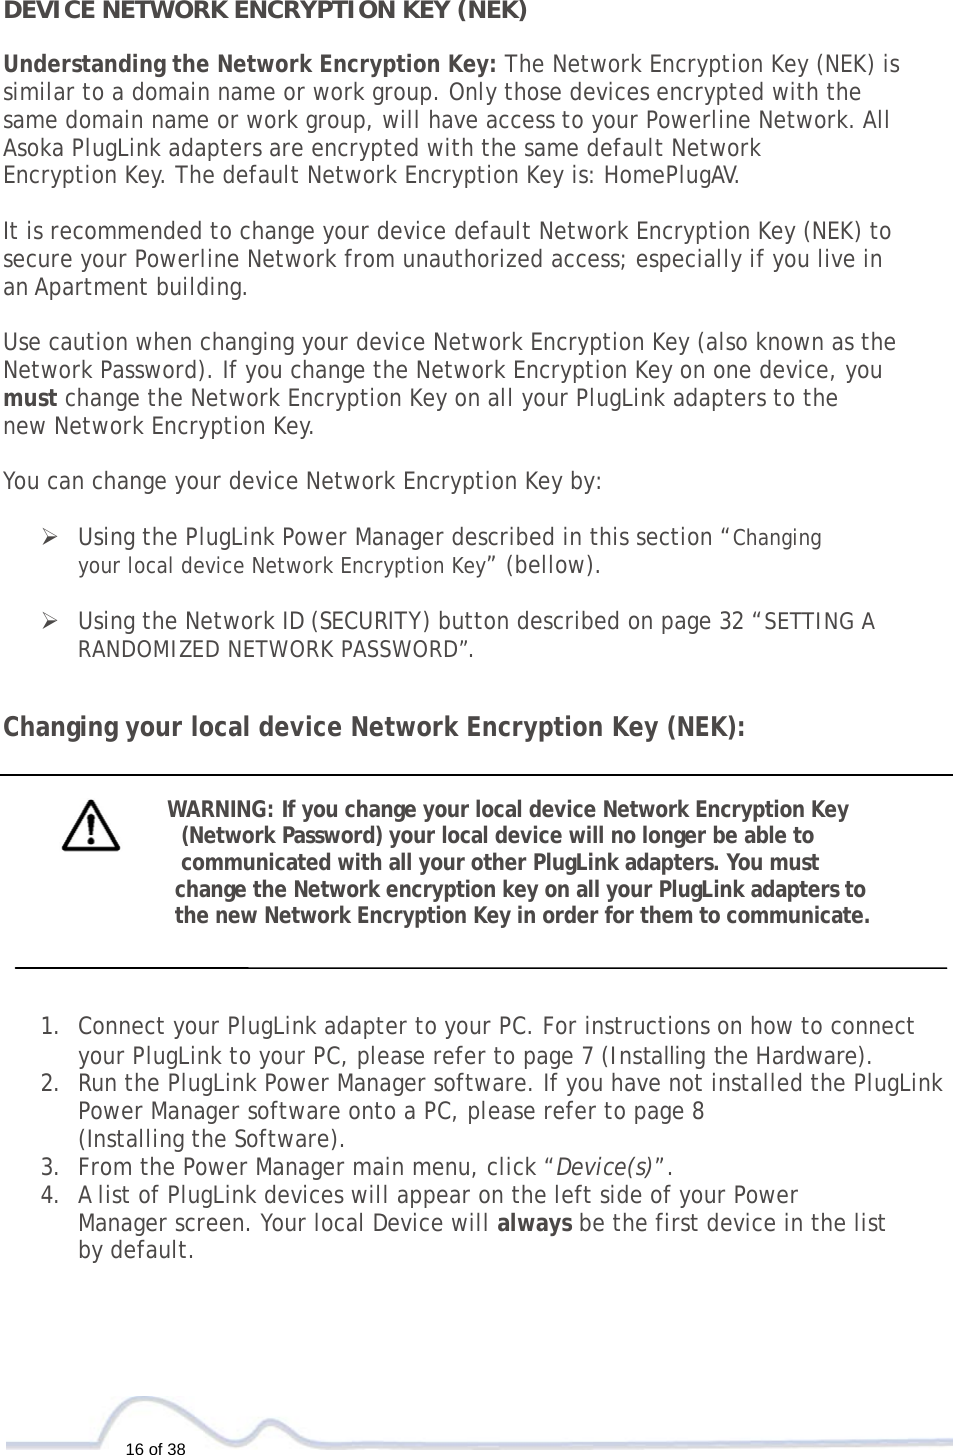  16 of 38  DEVICE NETWORK ENCRYPTION KEY (NEK)  Understanding the Network Encryption Key: The Network Encryption Key (NEK) is  similar to a domain name or work group. Only those devices encrypted with the  same domain name or work group, will have access to your Powerline Network. All  Asoka PlugLink adapters are encrypted with the same default Network  Encryption Key. The default Network Encryption Key is: HomePlugAV.   It is recommended to change your device default Network Encryption Key (NEK) to  secure your Powerline Network from unauthorized access; especially if you live in  an Apartment building.   Use caution when changing your device Network Encryption Key (also known as the Network Password). If you change the Network Encryption Key on one device, you  must change the Network Encryption Key on all your PlugLink adapters to the  new Network Encryption Key.    You can change your device Network Encryption Key by:   ¾ Using the PlugLink Power Manager described in this section “Changing  your local device Network Encryption Key” (bellow).  ¾ Using the Network ID (SECURITY) button described on page 32 “SETTING A RANDOMIZED NETWORK PASSWORD”.  Changing your local device Network Encryption Key (NEK):   WARNING: If you change your local device Network Encryption Key  (Network Password) your local device will no longer be able to  communicated with all your other PlugLink adapters. You must  change the Network encryption key on all your PlugLink adapters to  the new Network Encryption Key in order for them to communicate.     1. Connect your PlugLink adapter to your PC. For instructions on how to connect your PlugLink to your PC, please refer to page 7 (Installing the Hardware).  2. Run the PlugLink Power Manager software. If you have not installed the PlugLink Power Manager software onto a PC, please refer to page 8  (Installing the Software).  3. From the Power Manager main menu, click “Device(s)”. 4. A list of PlugLink devices will appear on the left side of your Power  Manager screen. Your local Device will always be the first device in the list  by default.  